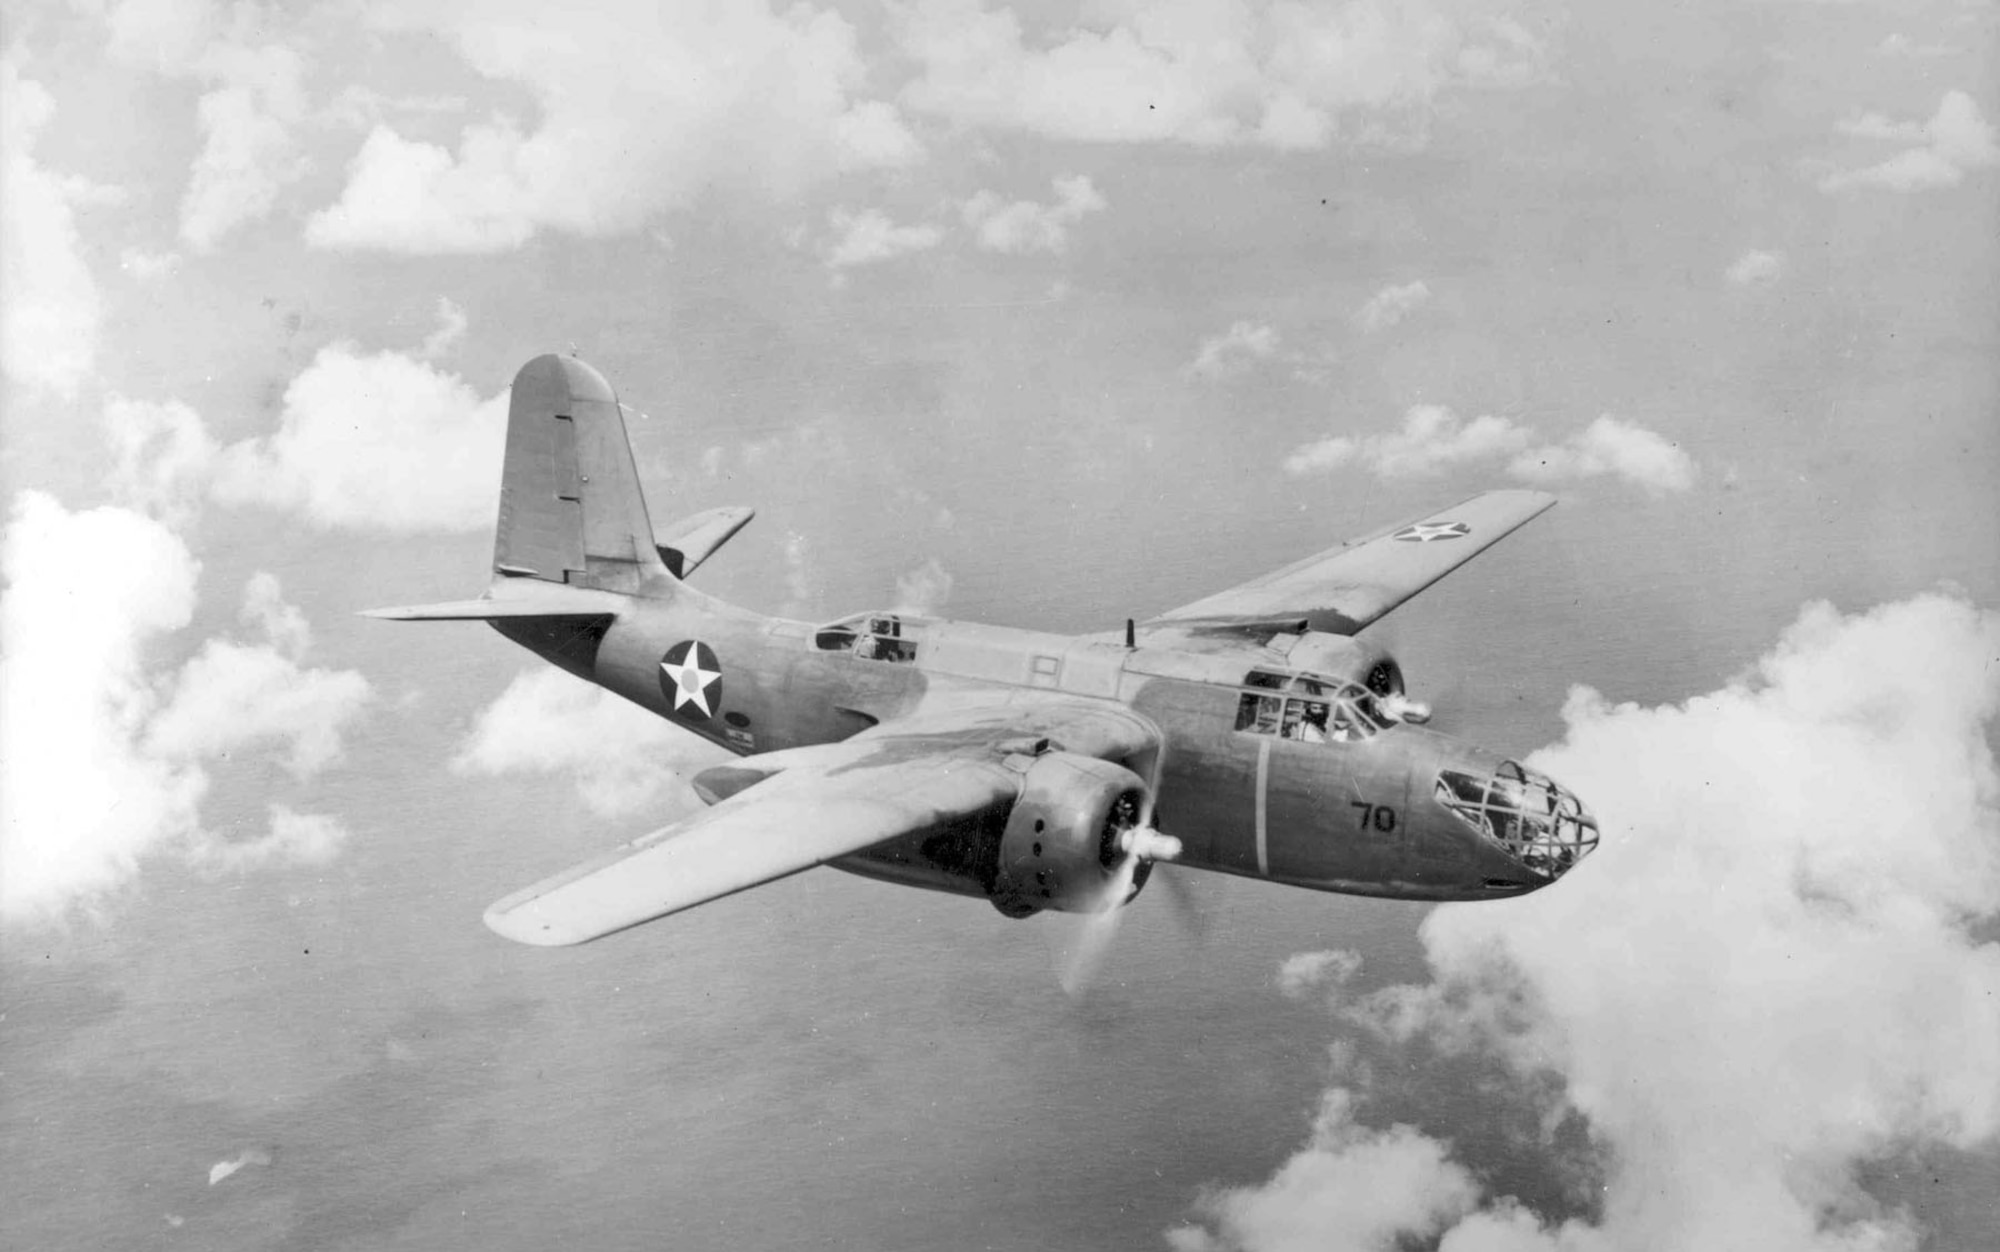 The 35th Photographic Reconnaissance Squadron flew a single Douglas A-20 Havoc, and two of the similar Douglas DB-7, light attack bombers in the photographic reconnaissance role in 1943, and during the Oregon Maneuver.  The squadron flew in support of the Blue Forces during the maneuver, and afterward re-equipped with the Lockheed F-5 Photo Lightning before it deployed overseas to China in 1944 to perform the photo recon mission.  This early-model A-20A was flown by the 58th Bomb Squadron and is pictured over Oahu, Hawaii on May 29, 1941. (U.S. Air Force Photo)